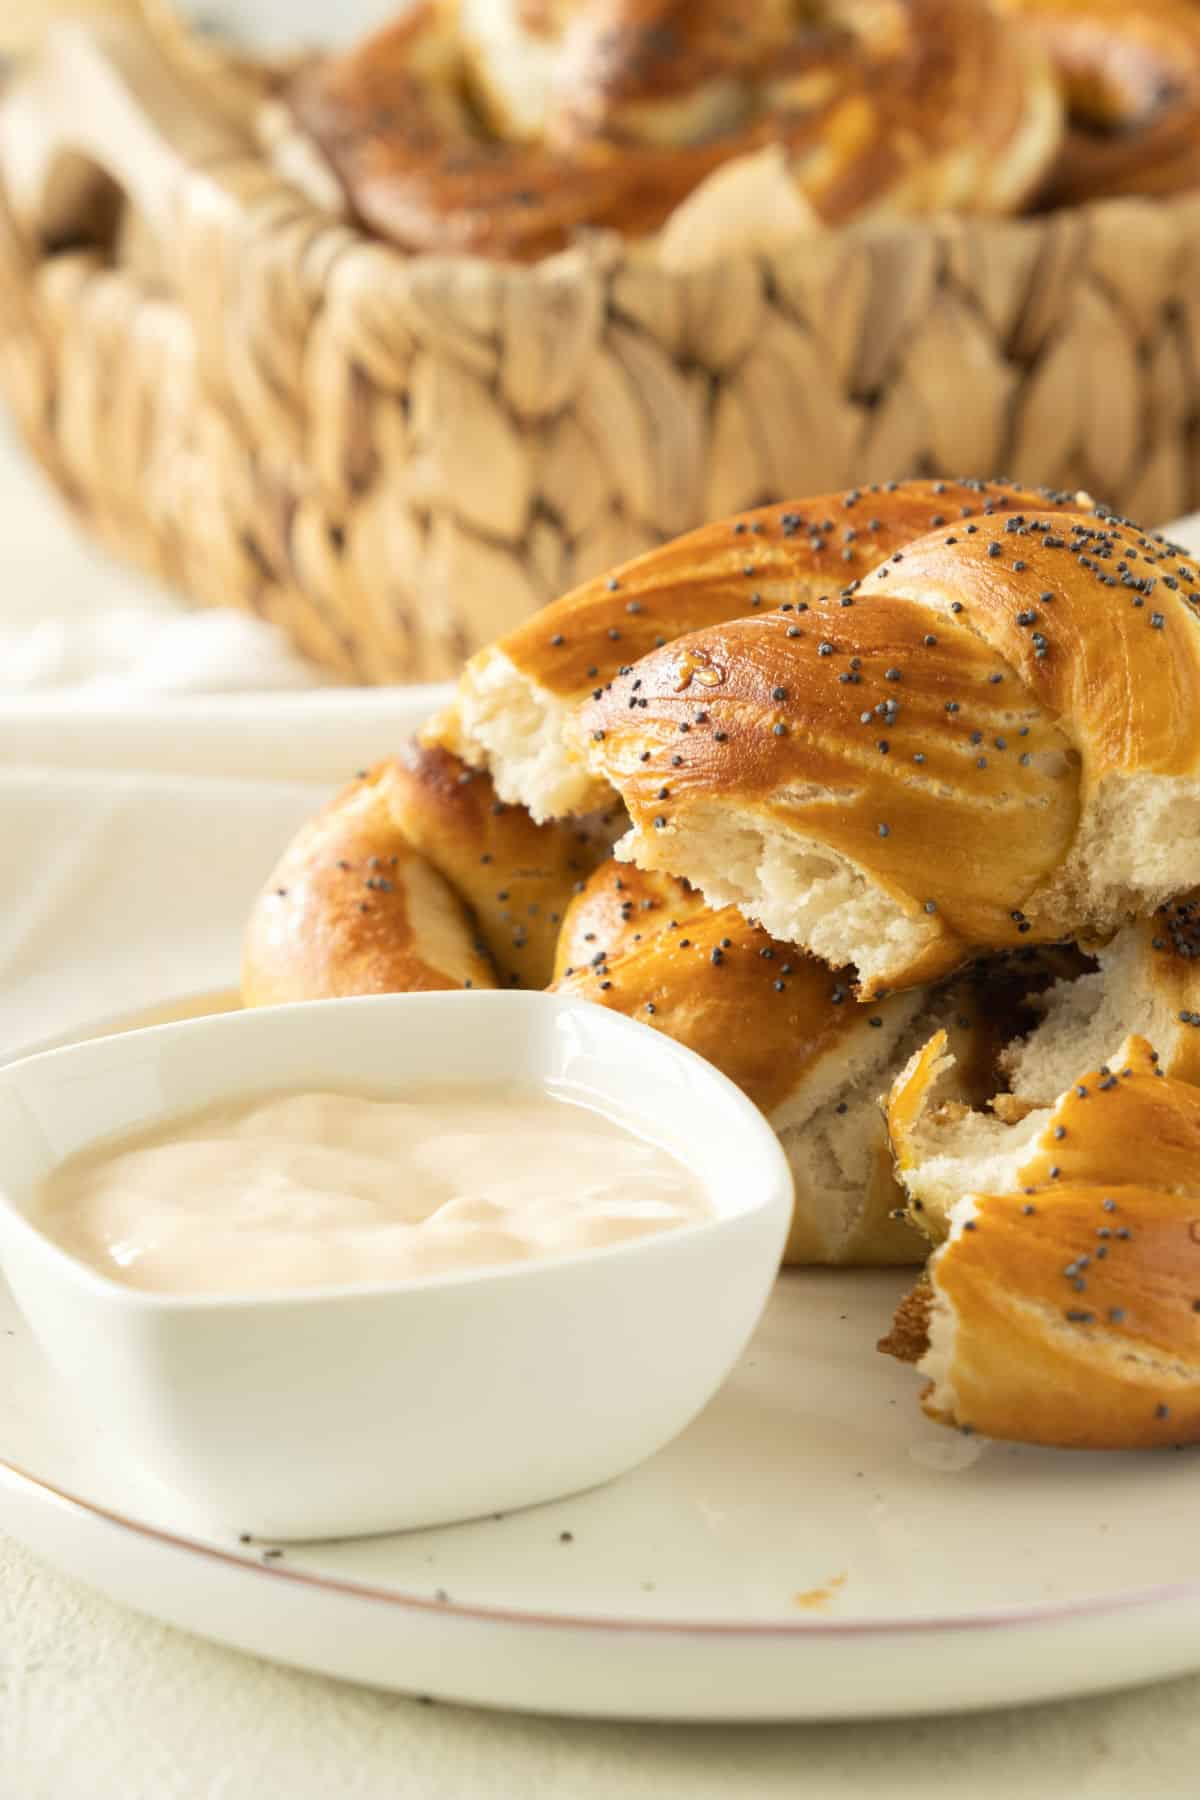 Pieces of soft pretzels on a white plate with cheese sauce in a bowl. Basket in the background.